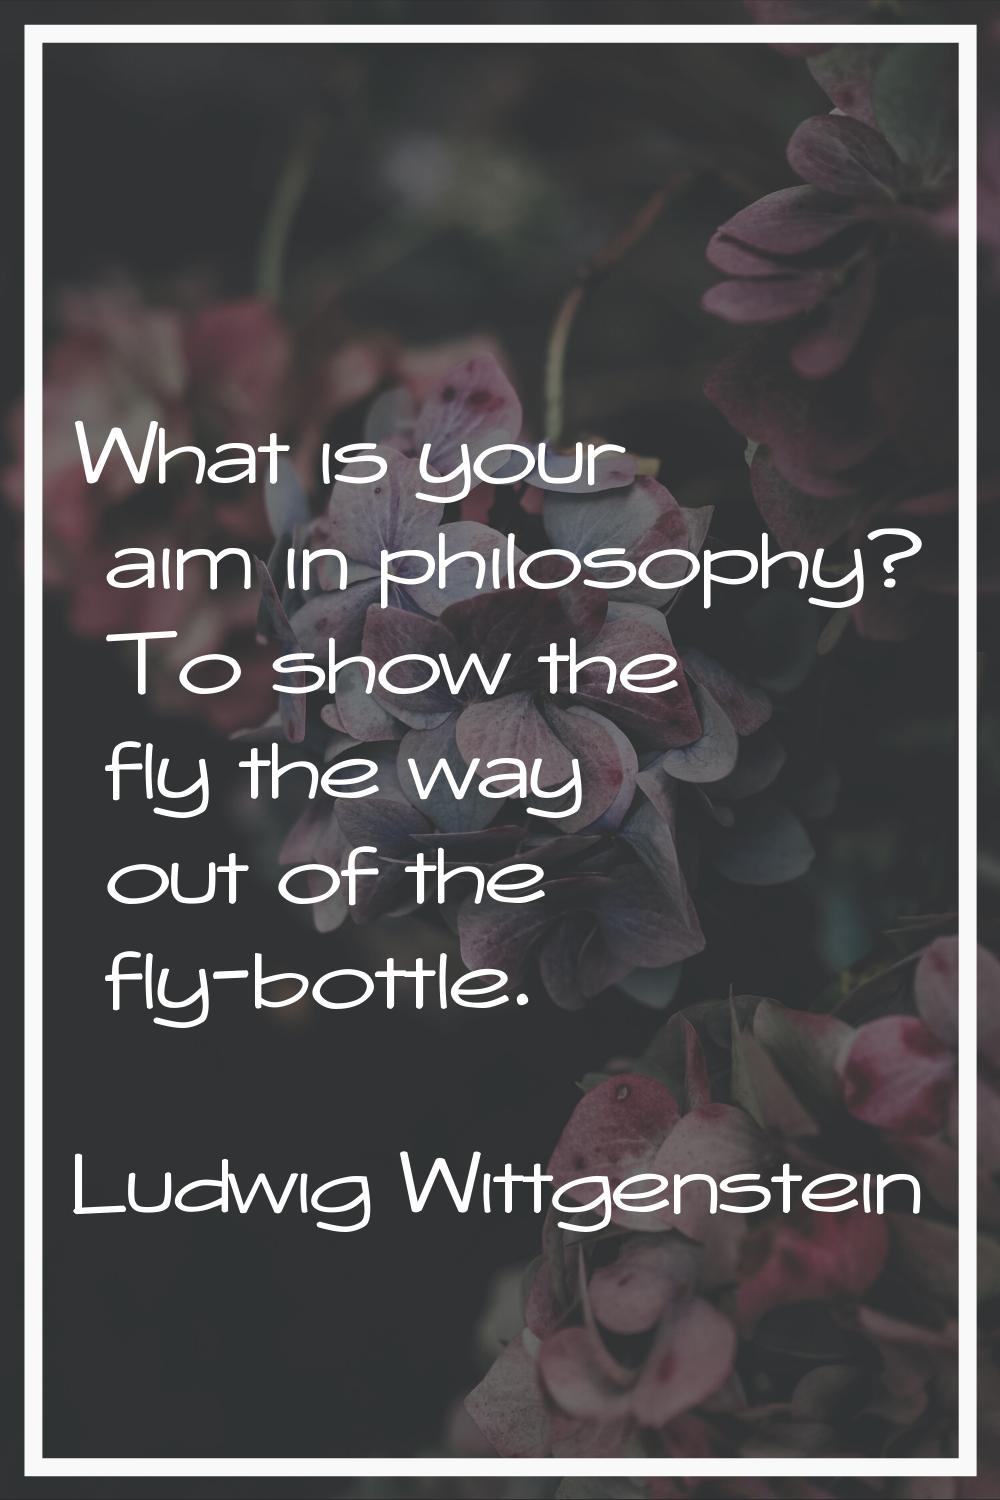 What is your aim in philosophy? To show the fly the way out of the fly-bottle.